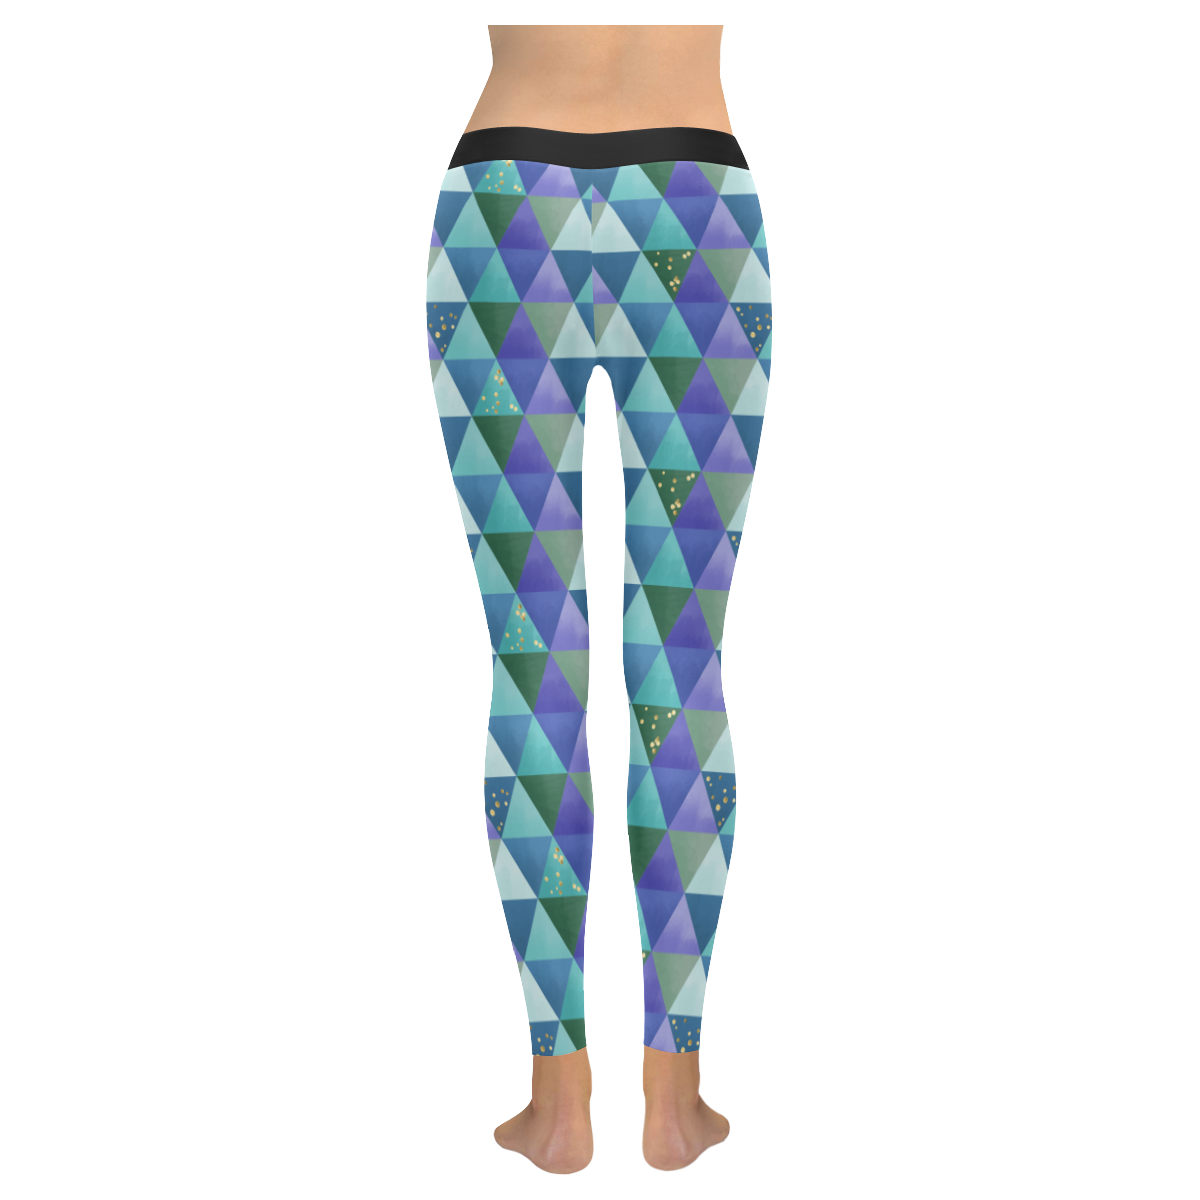 Triangle Pattern - Blue Violet Teal Green Women's Low Rise Leggings (Invisible Stitch) (Model L05)